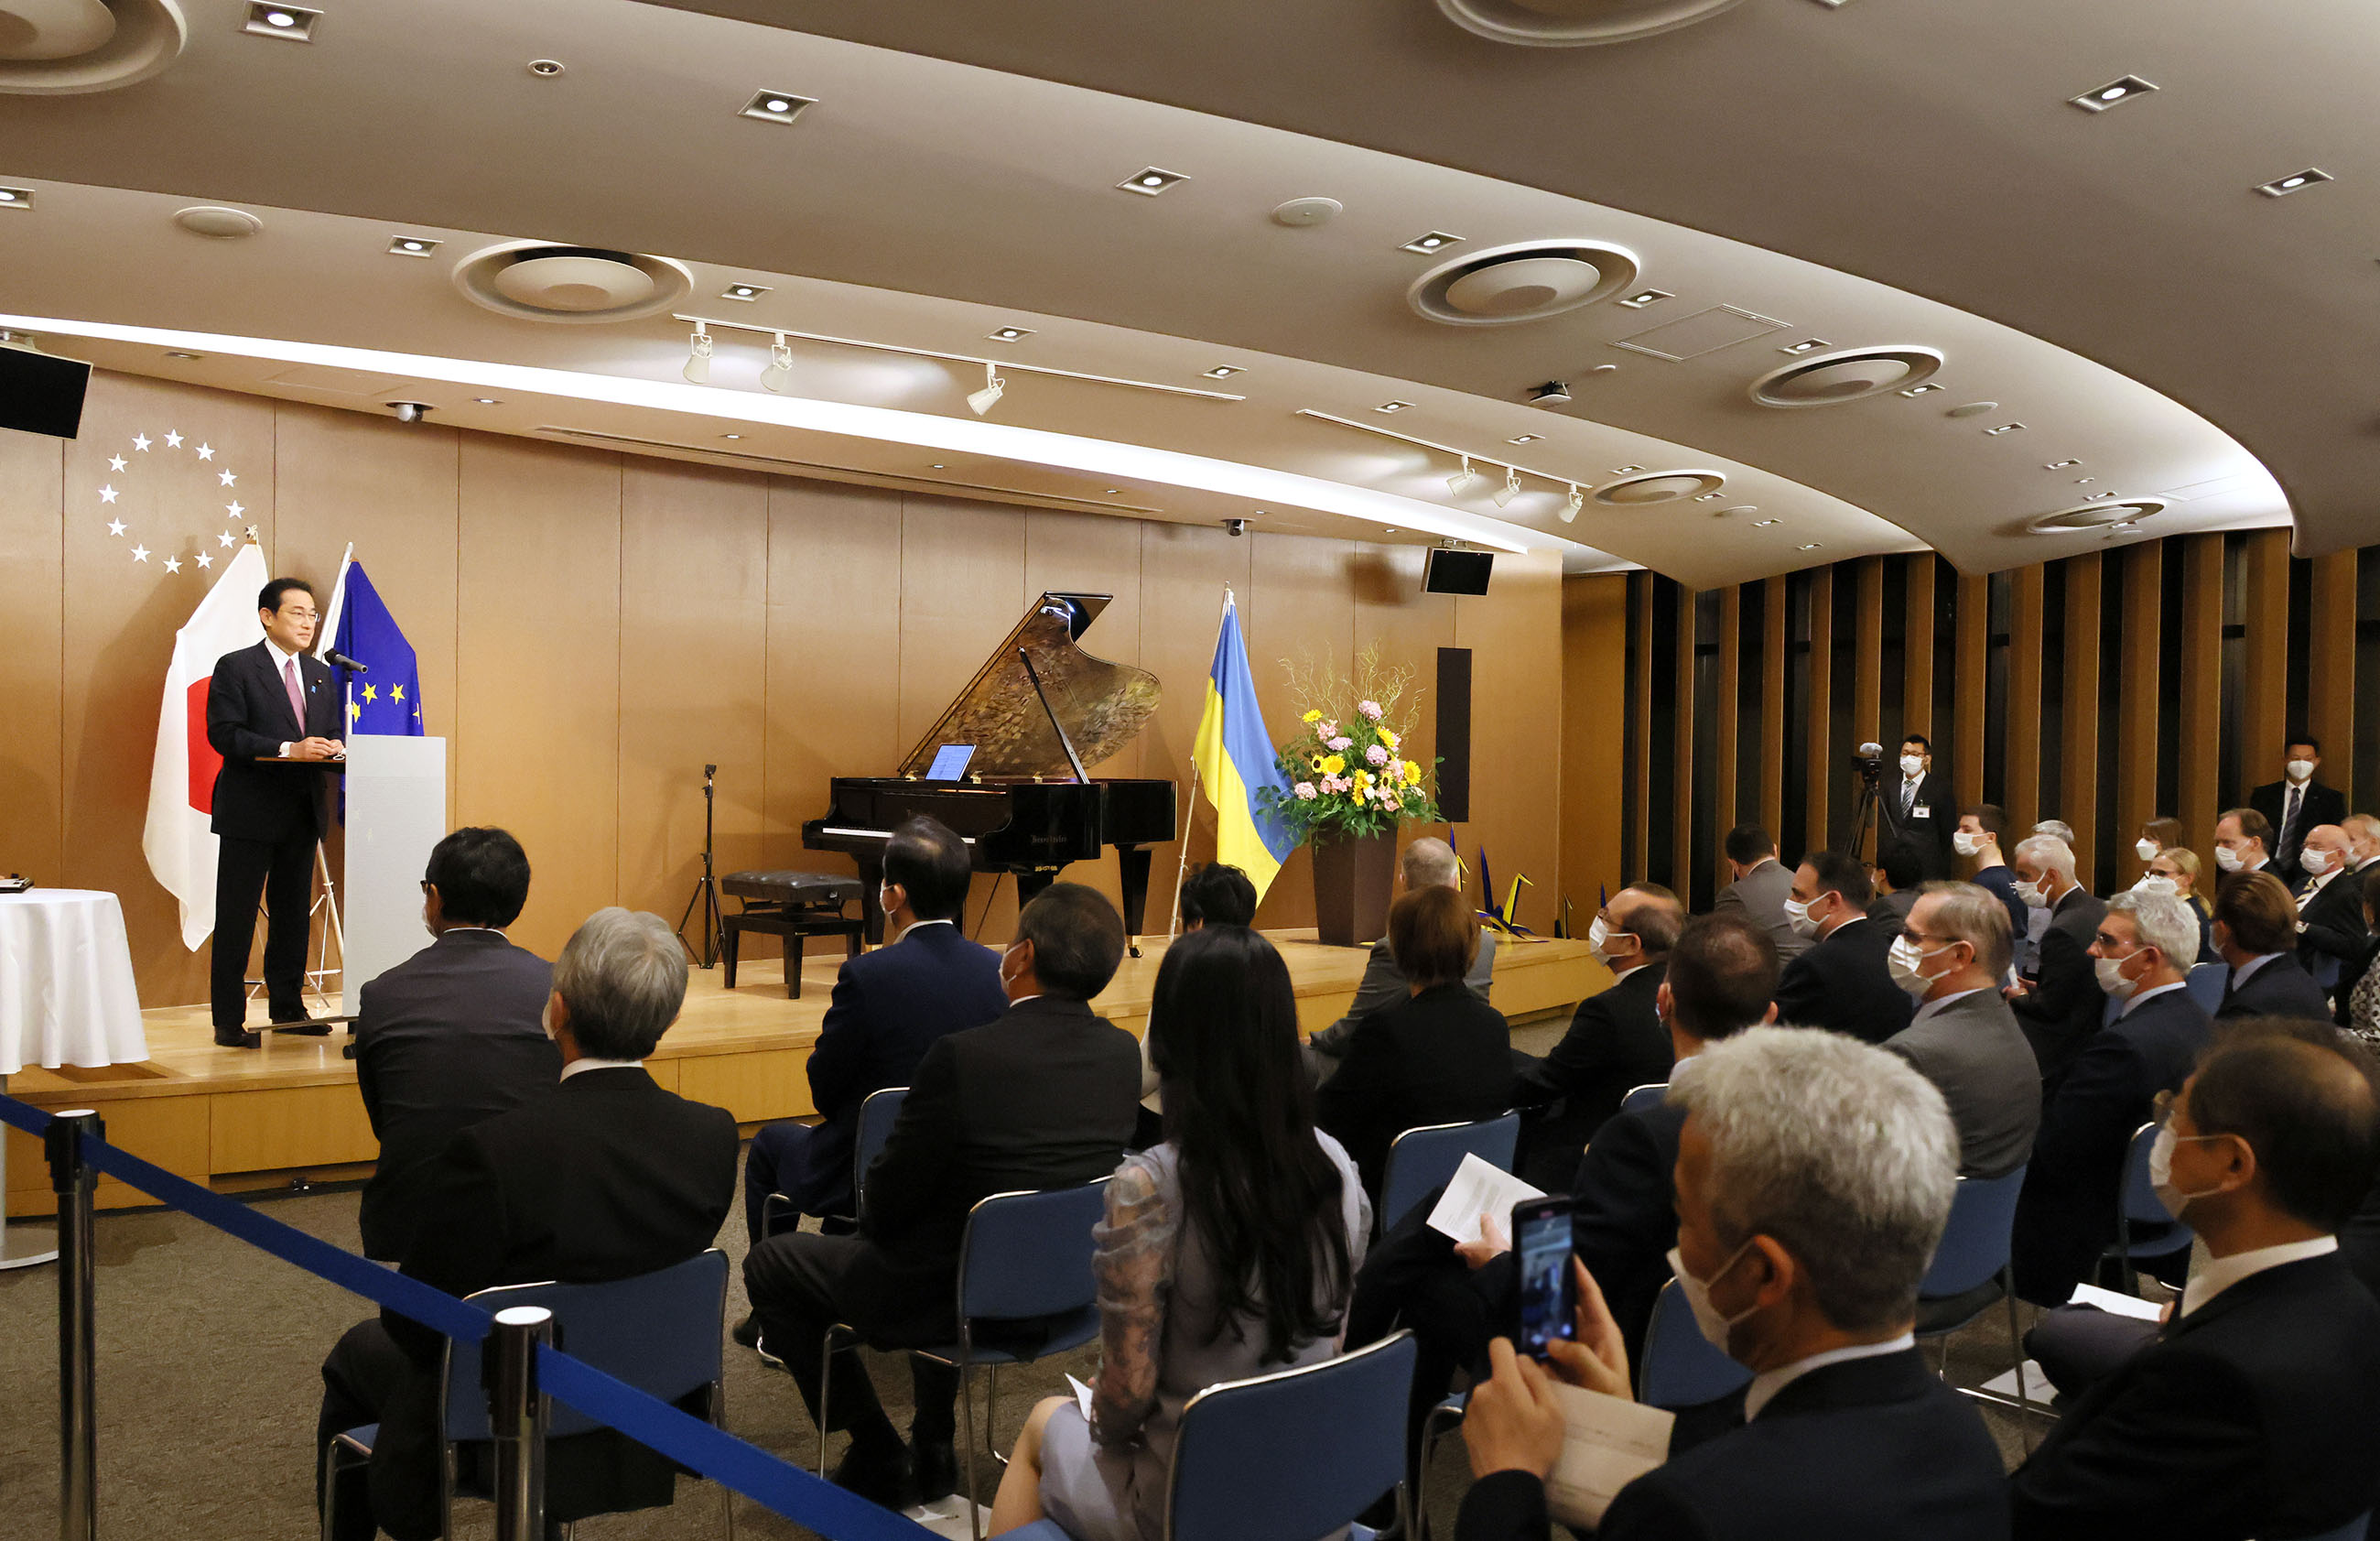 Charity Concert to Support Ukraine Organized by the Delegation of the European Union to Japan